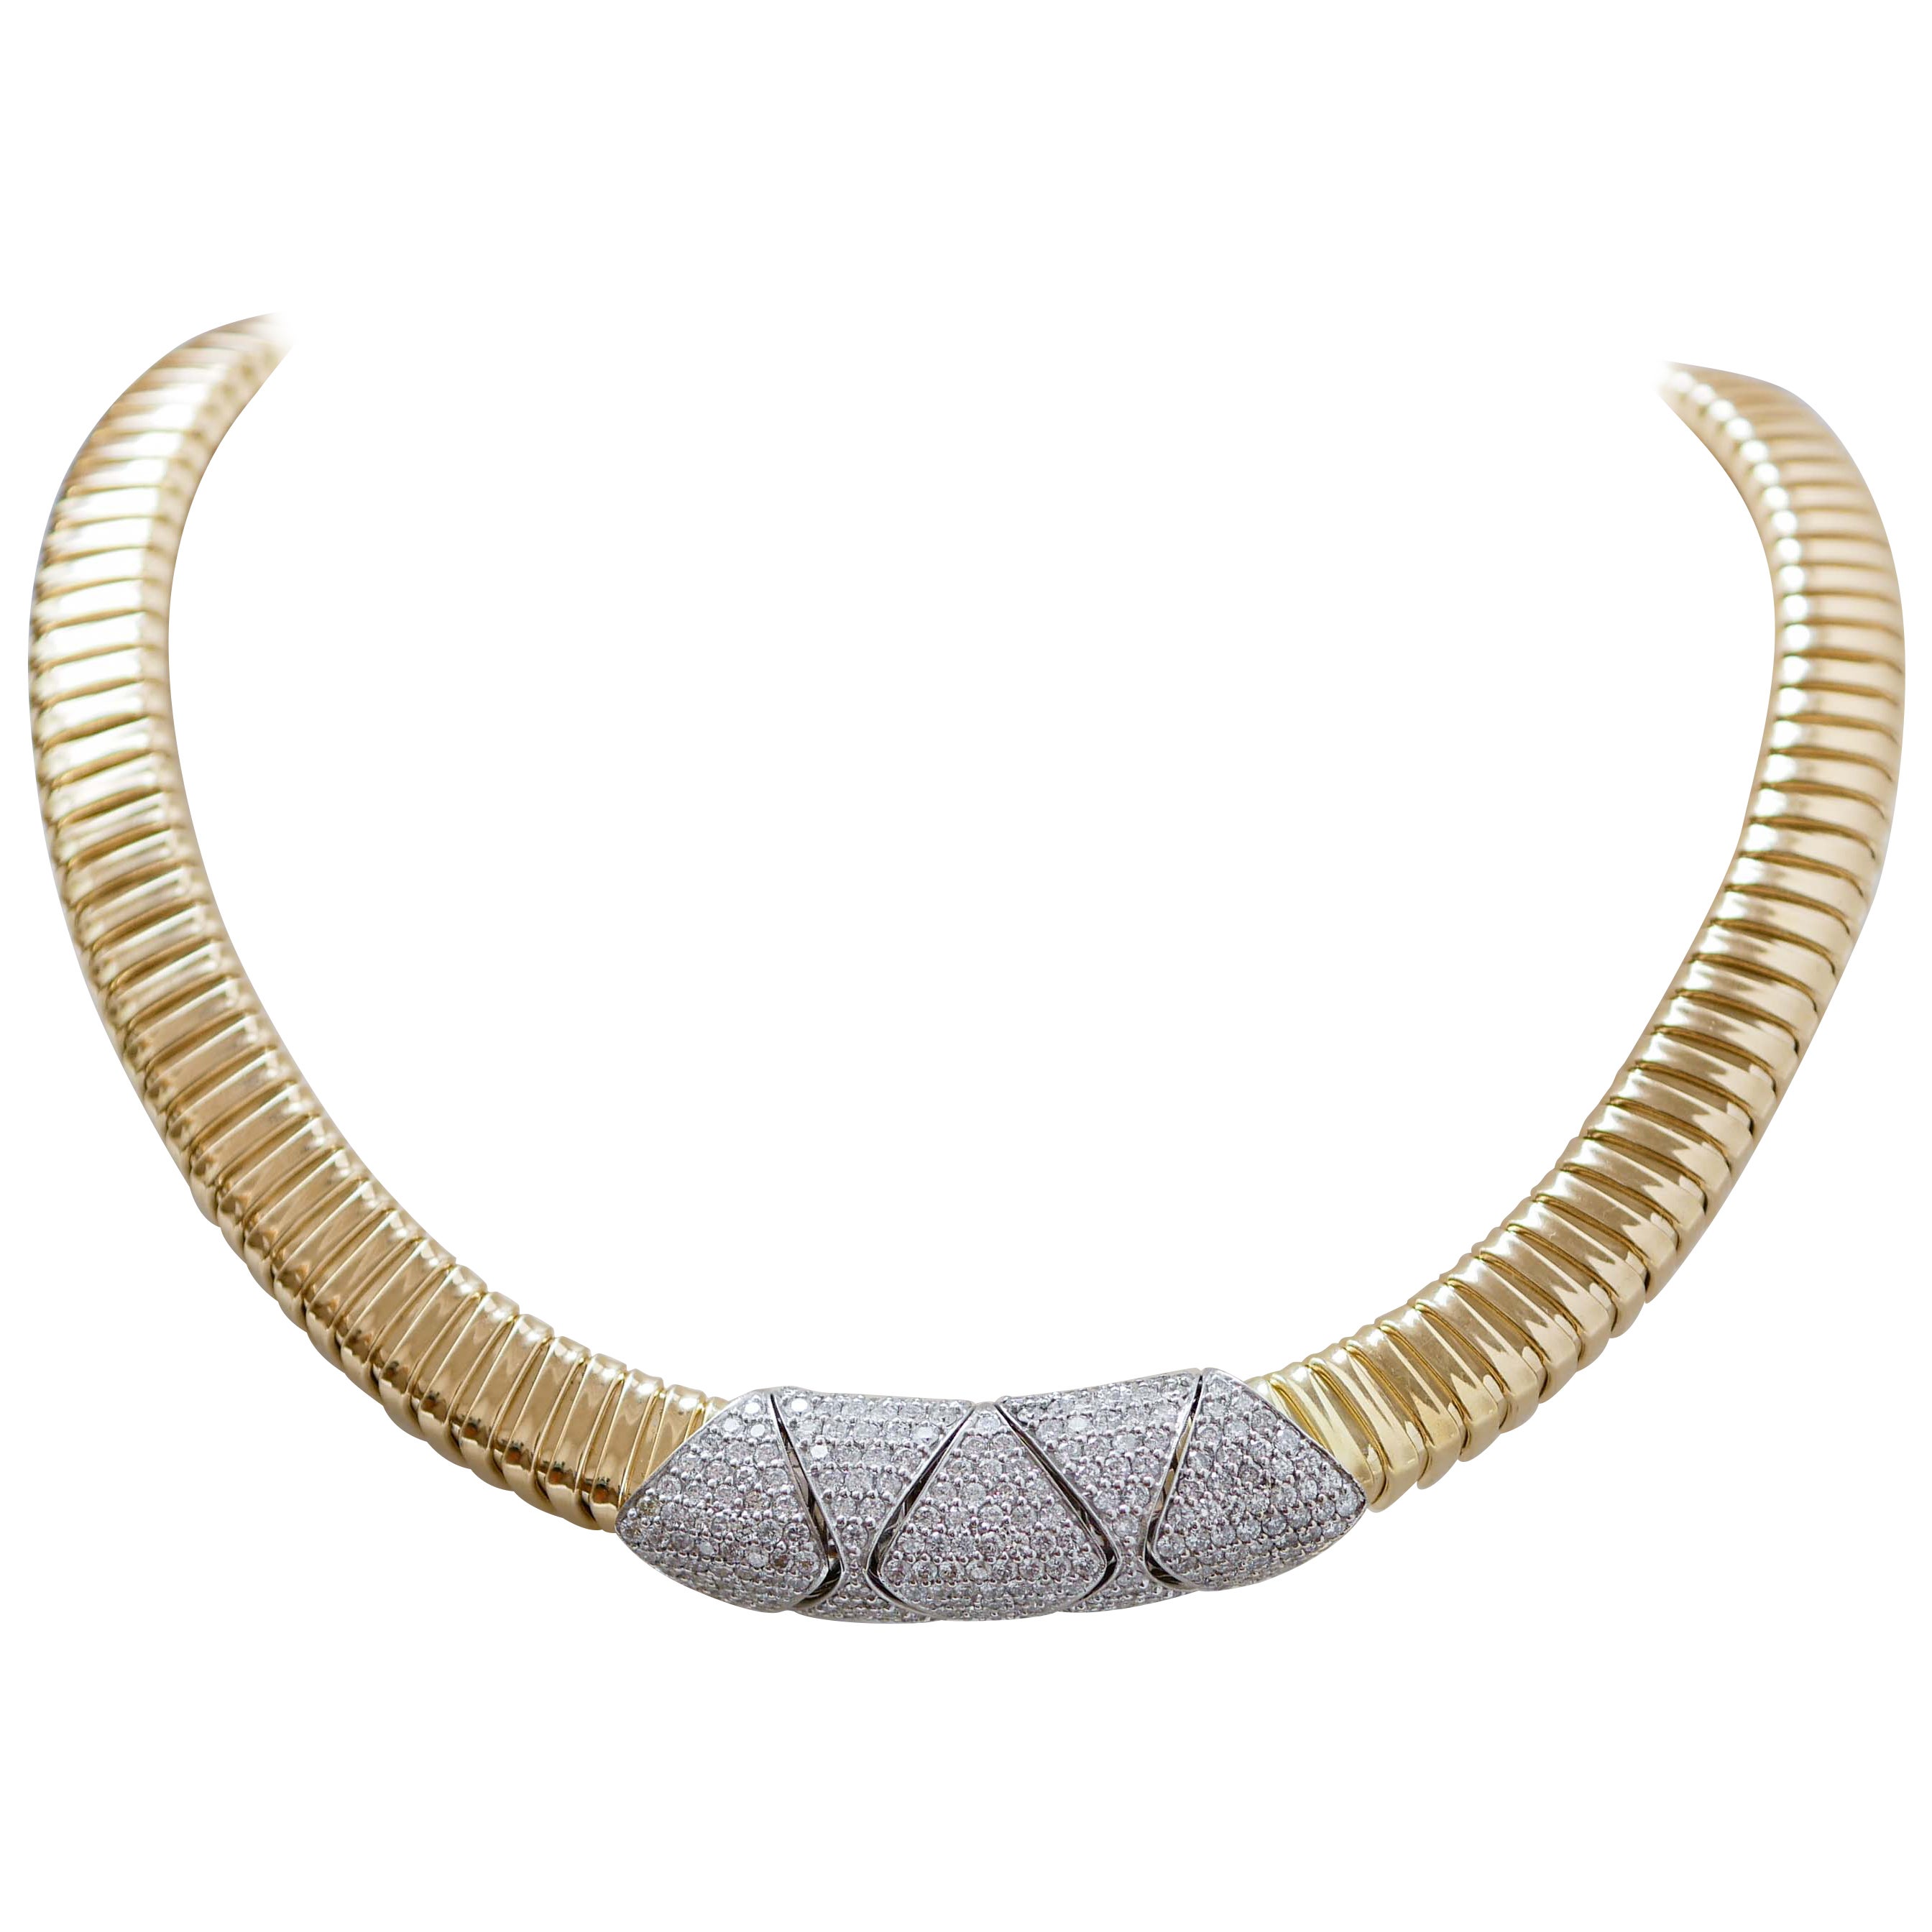 Diamonds, 18 Karat Yellow Gold and White Gold Tubogas Necklace. For Sale